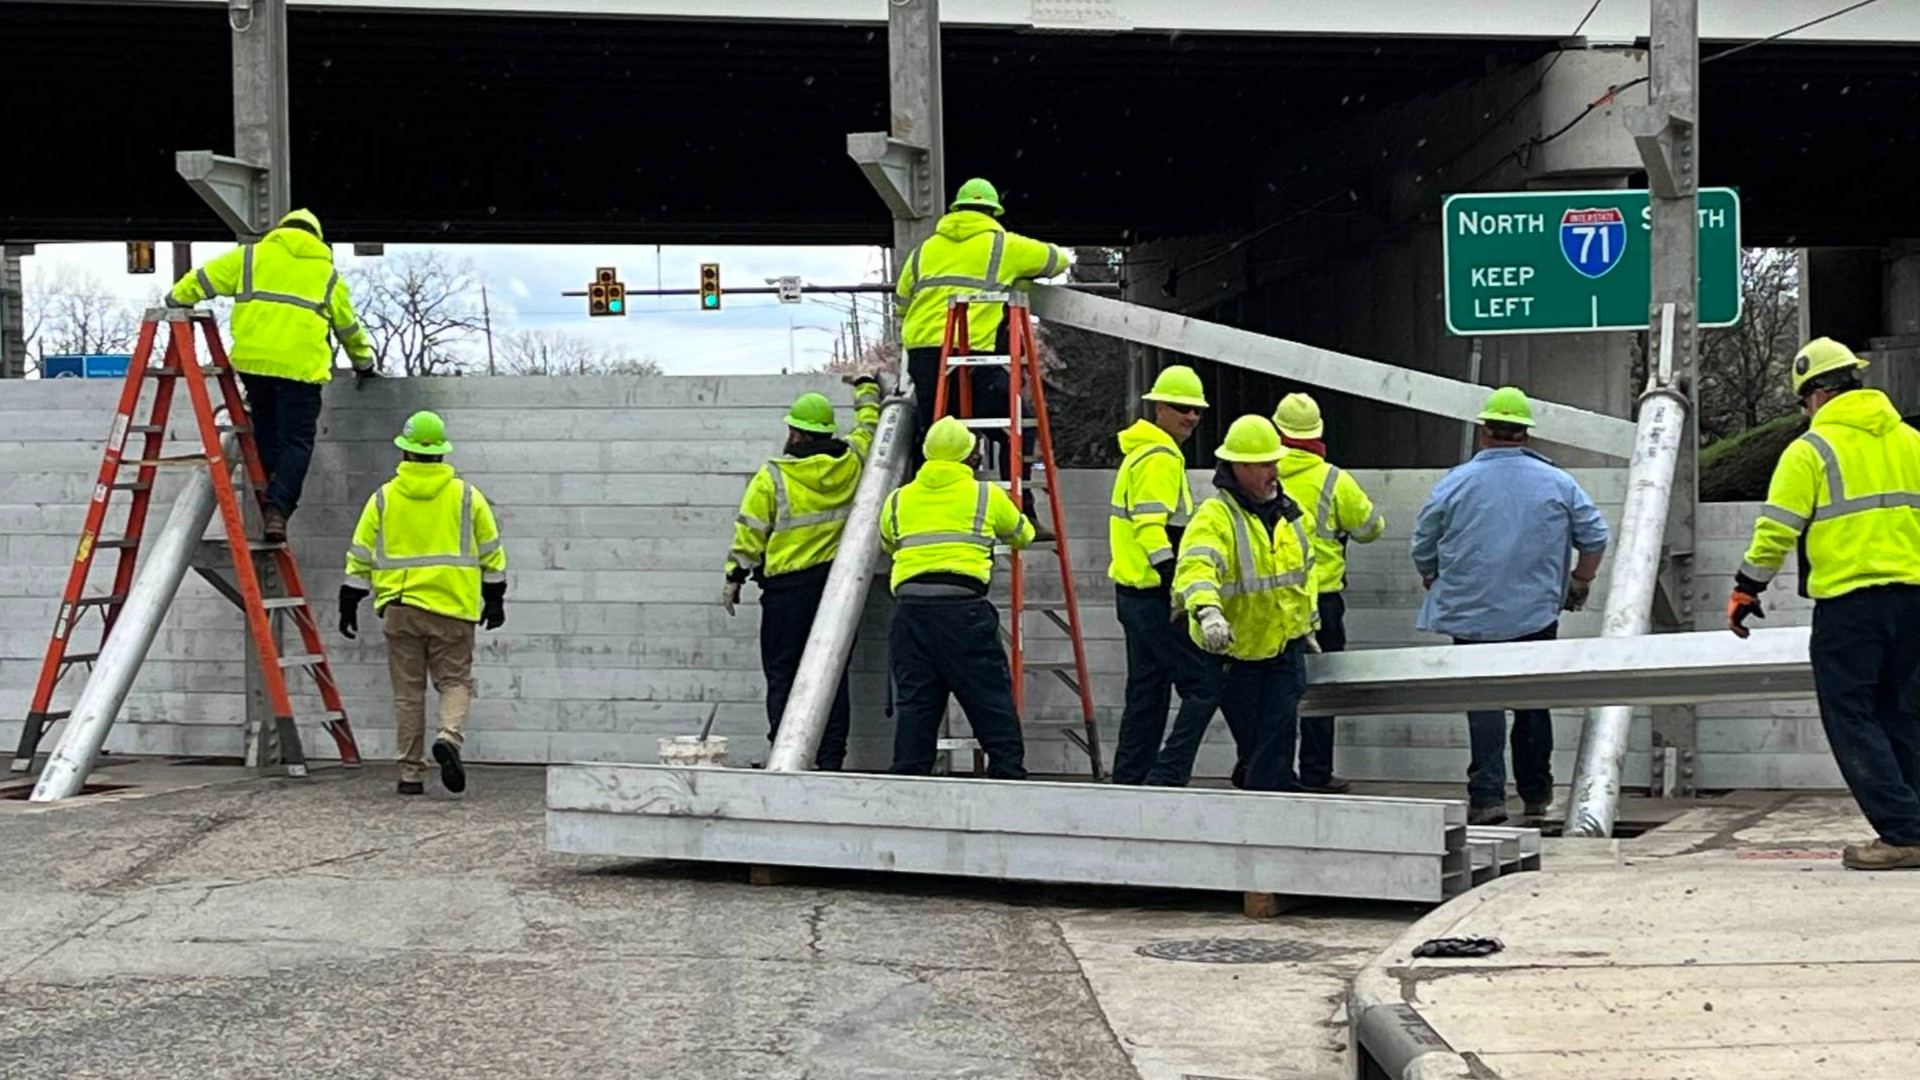 One wall was installed at Greenlawn Avenue near Interstate 71 and the other was installed at Harmon Avenue near Frank Road.